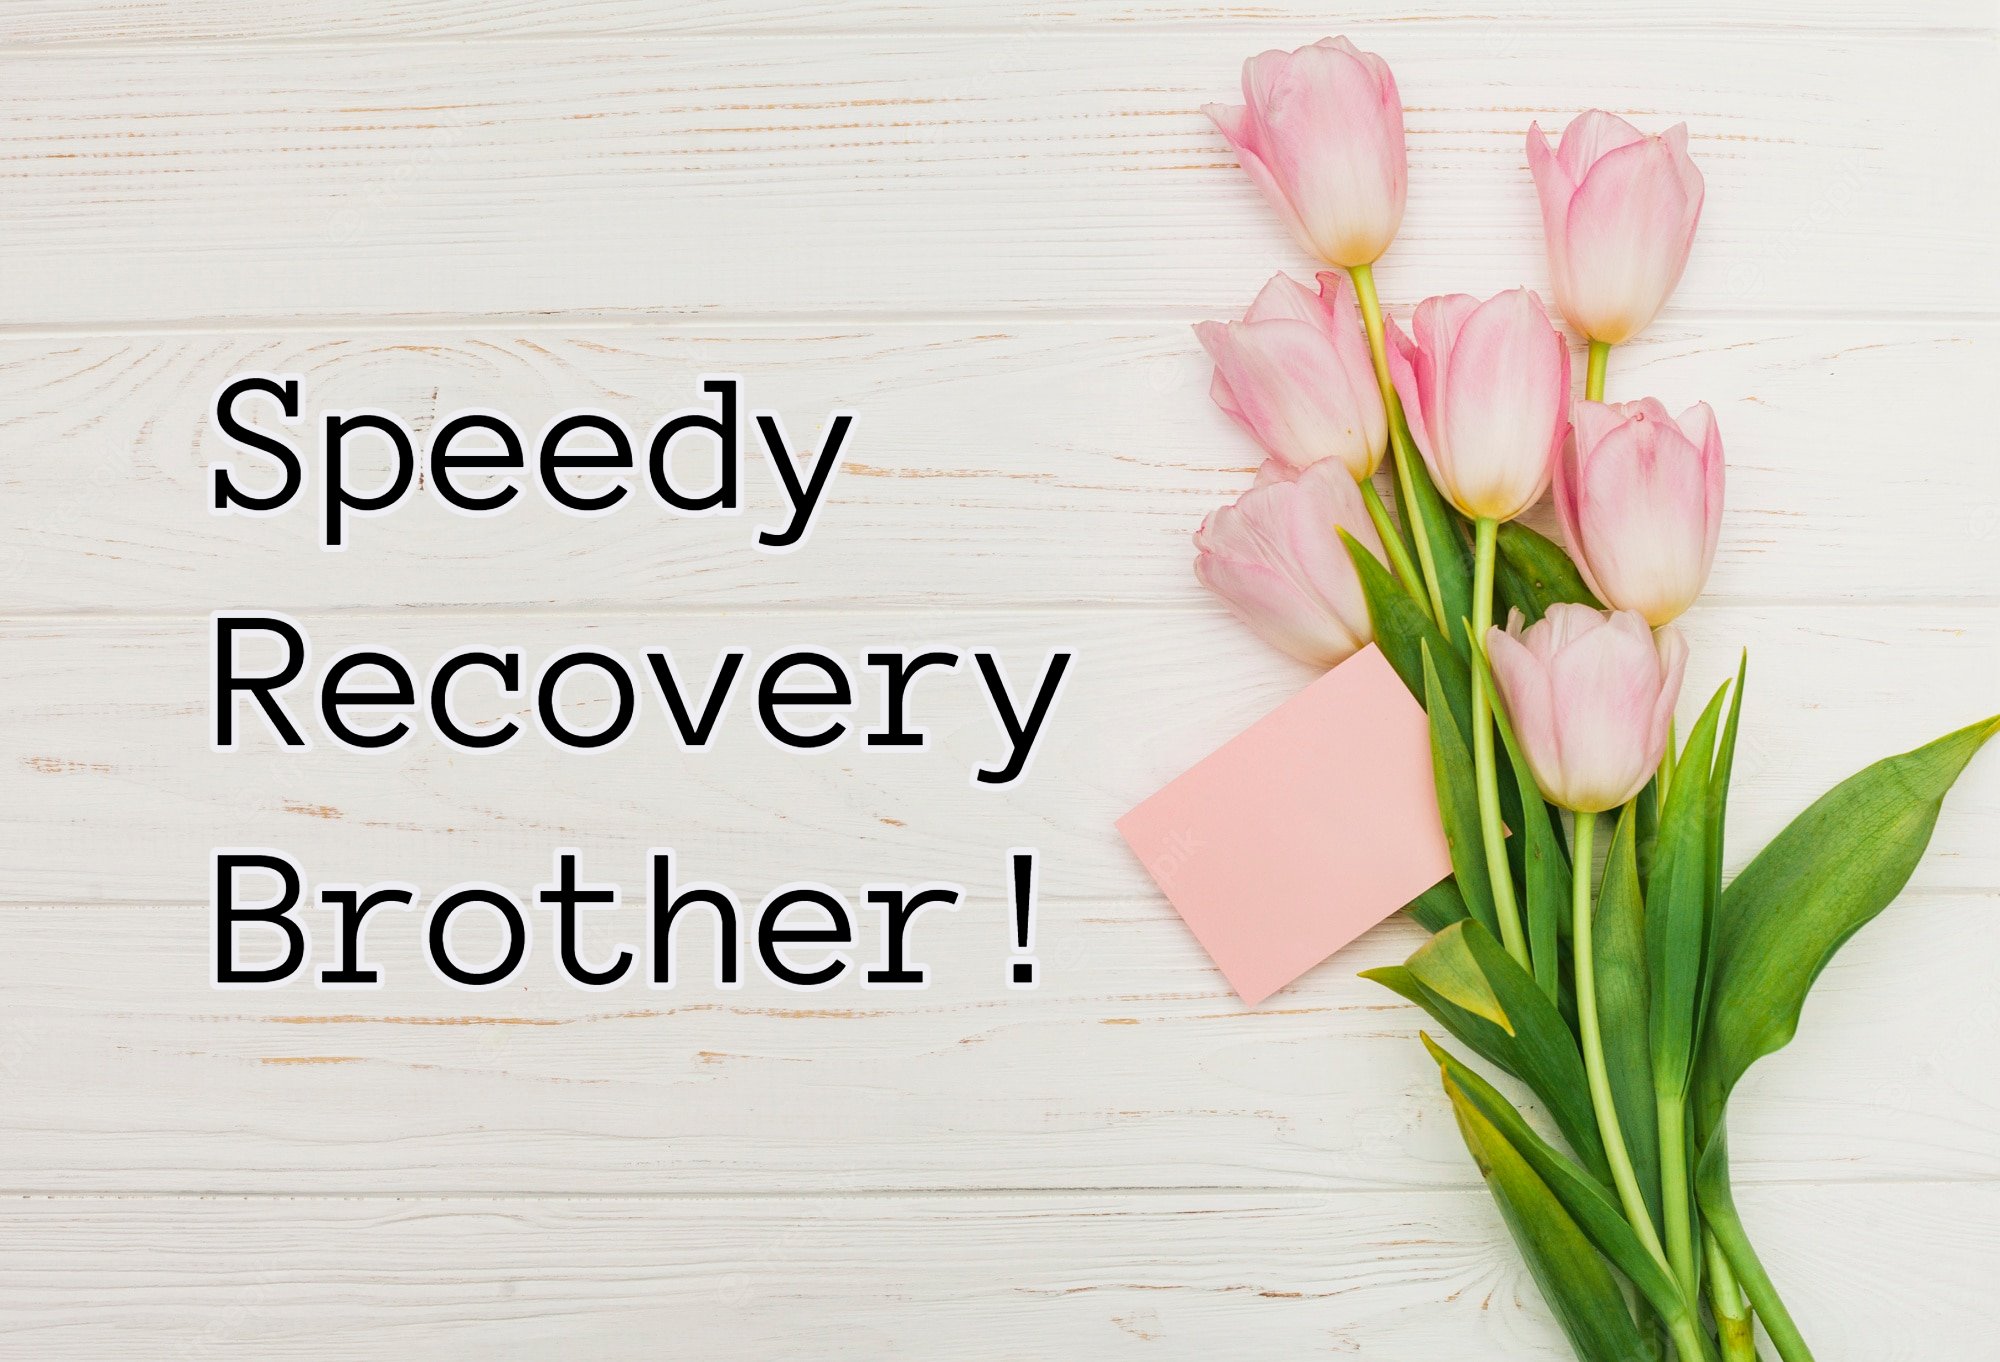 Get Well Soon Messages For Brother, Brother-in-Law